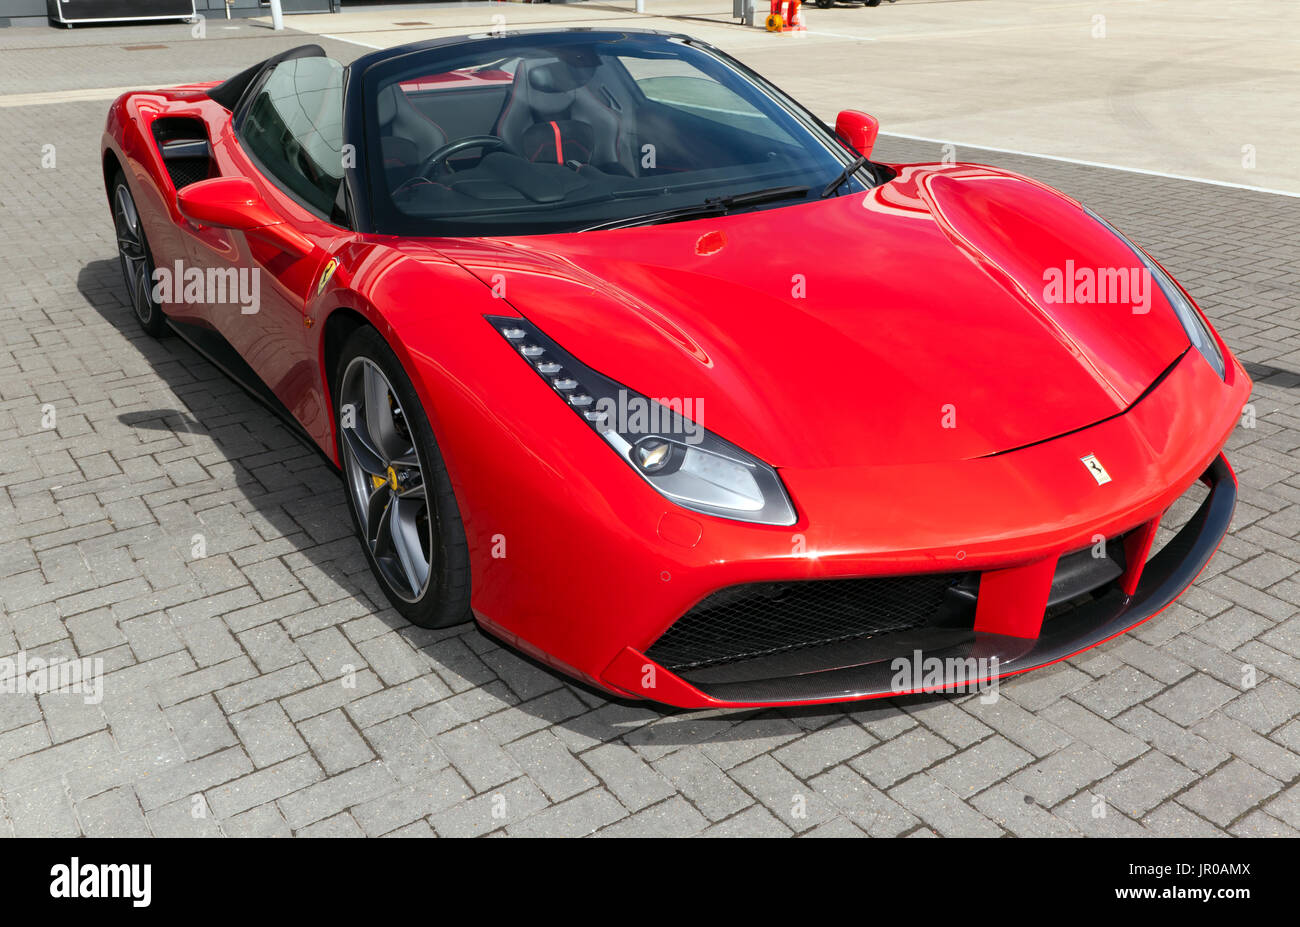 A Three-quarter view of a Ferrari 488 Spider, on static display in the international paddock, at the 2017 Silverstone Classic Stock Photo